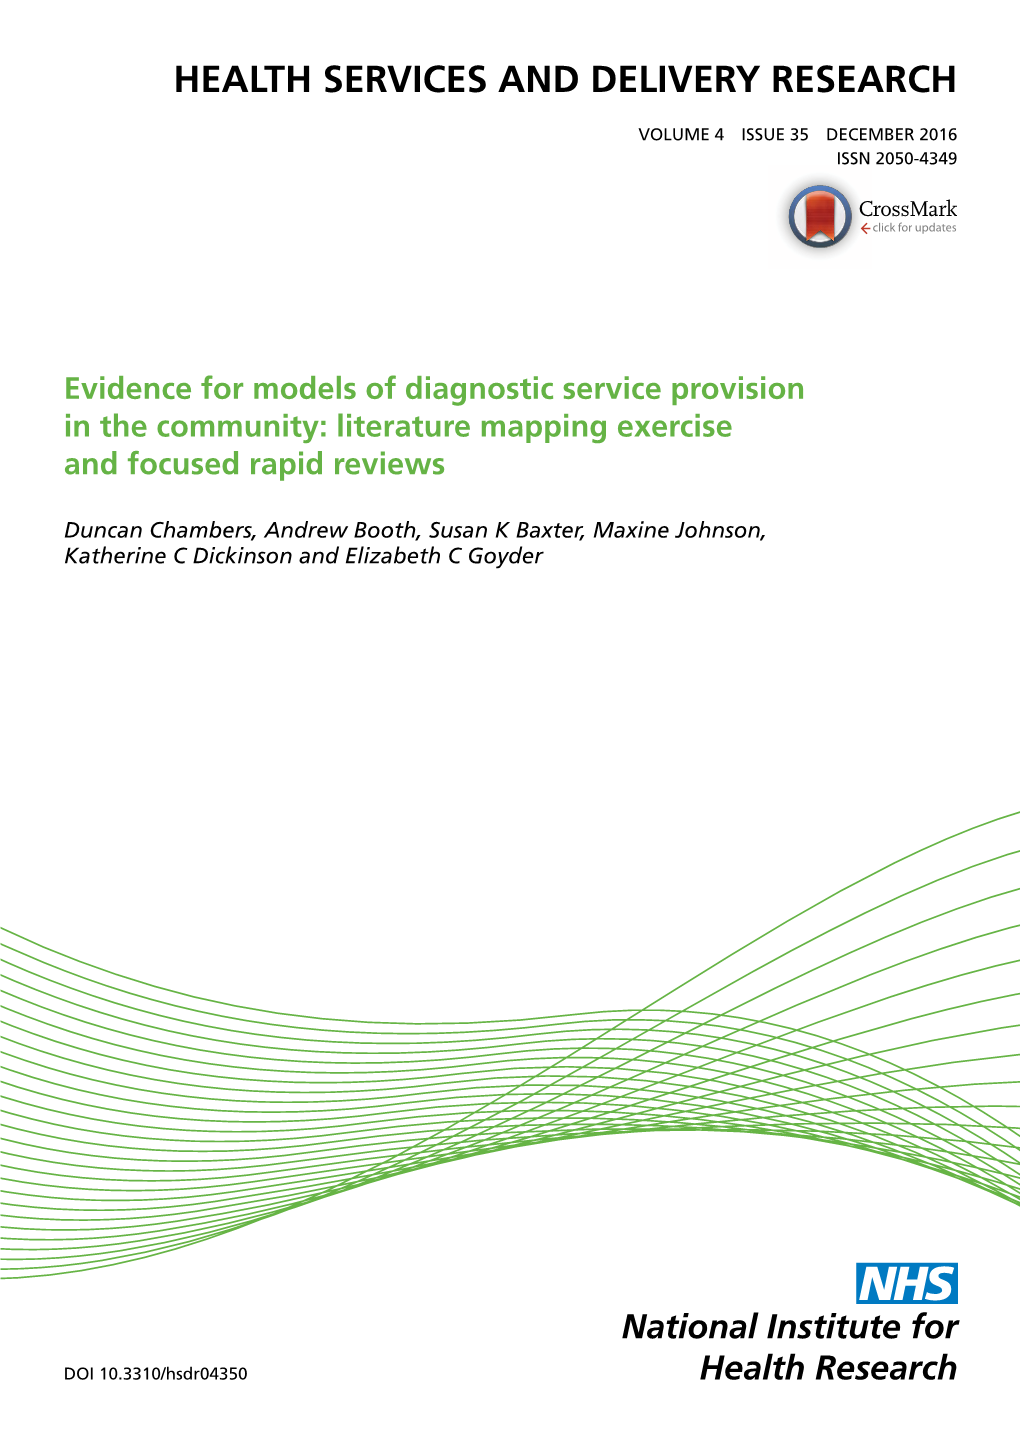 Evidence for Models of Diagnostic Service Provision in the Community: Literature Mapping Exercise and Focused Rapid Reviews